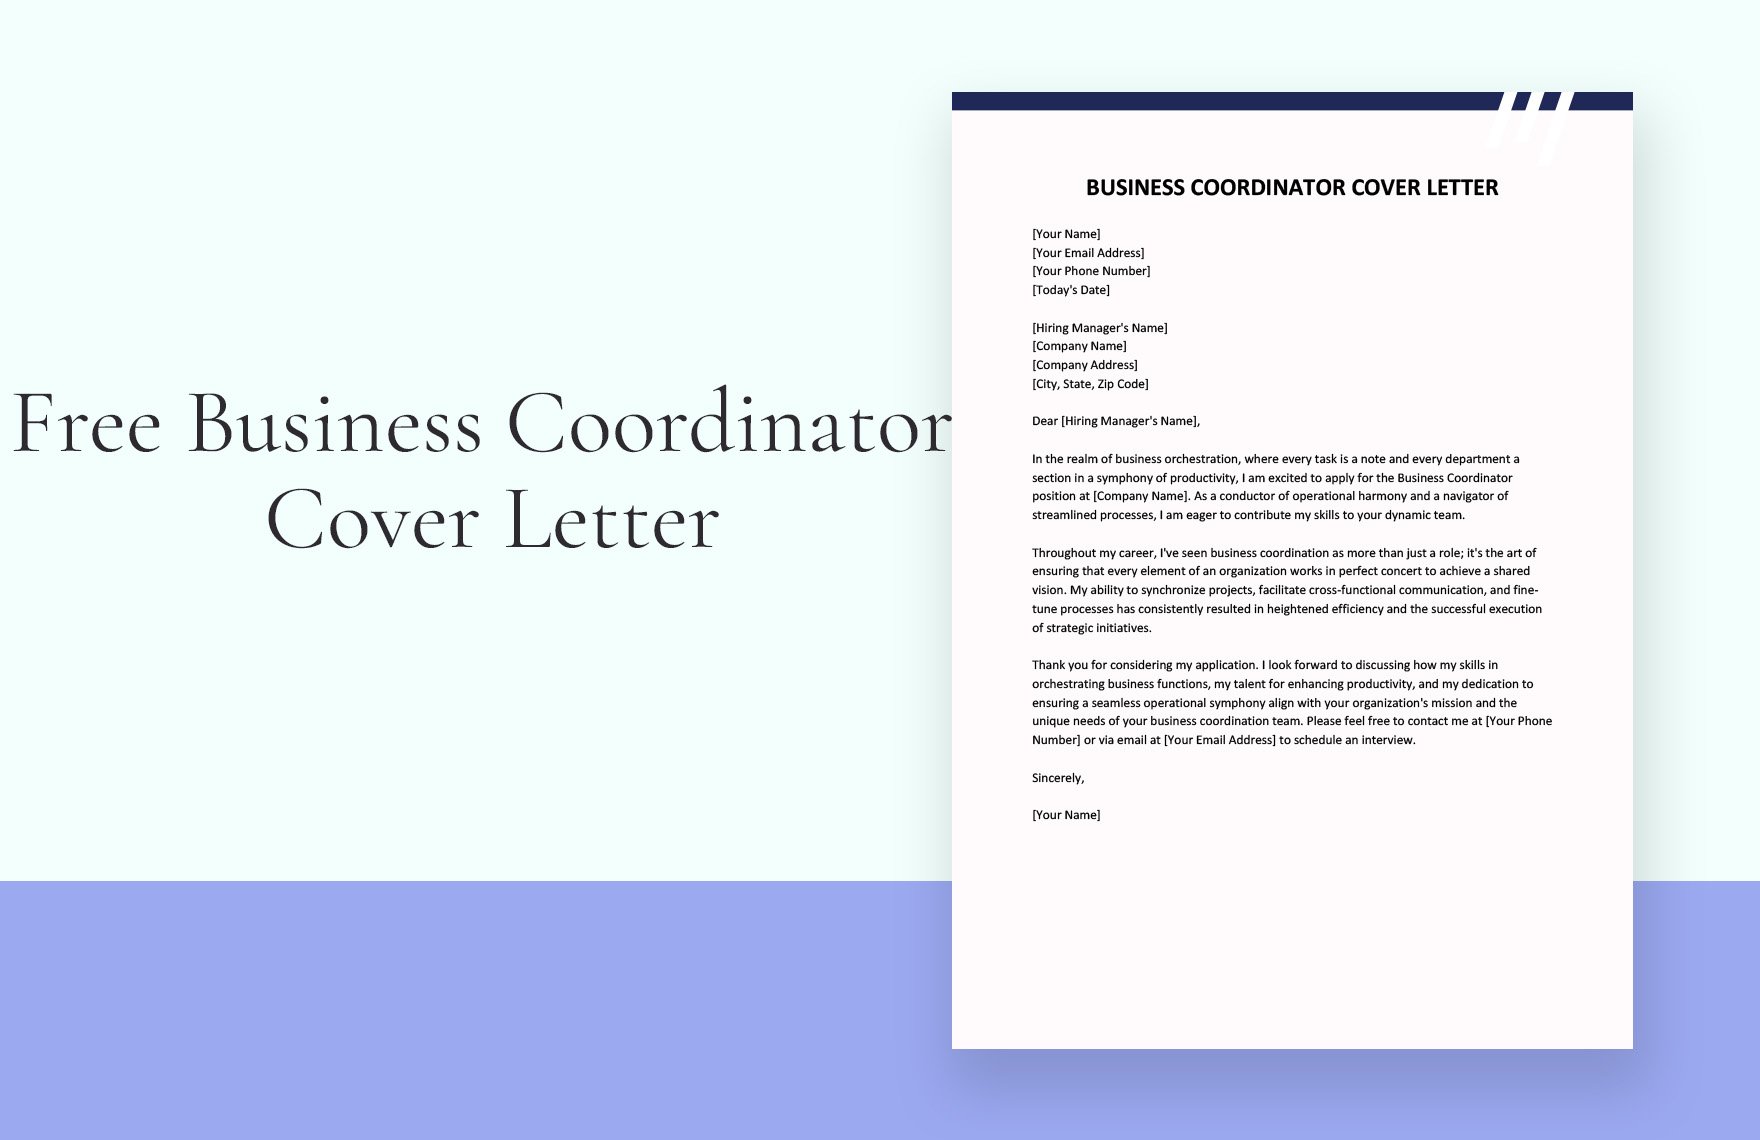 Business Coordinator Cover Letter in Word, Google Docs